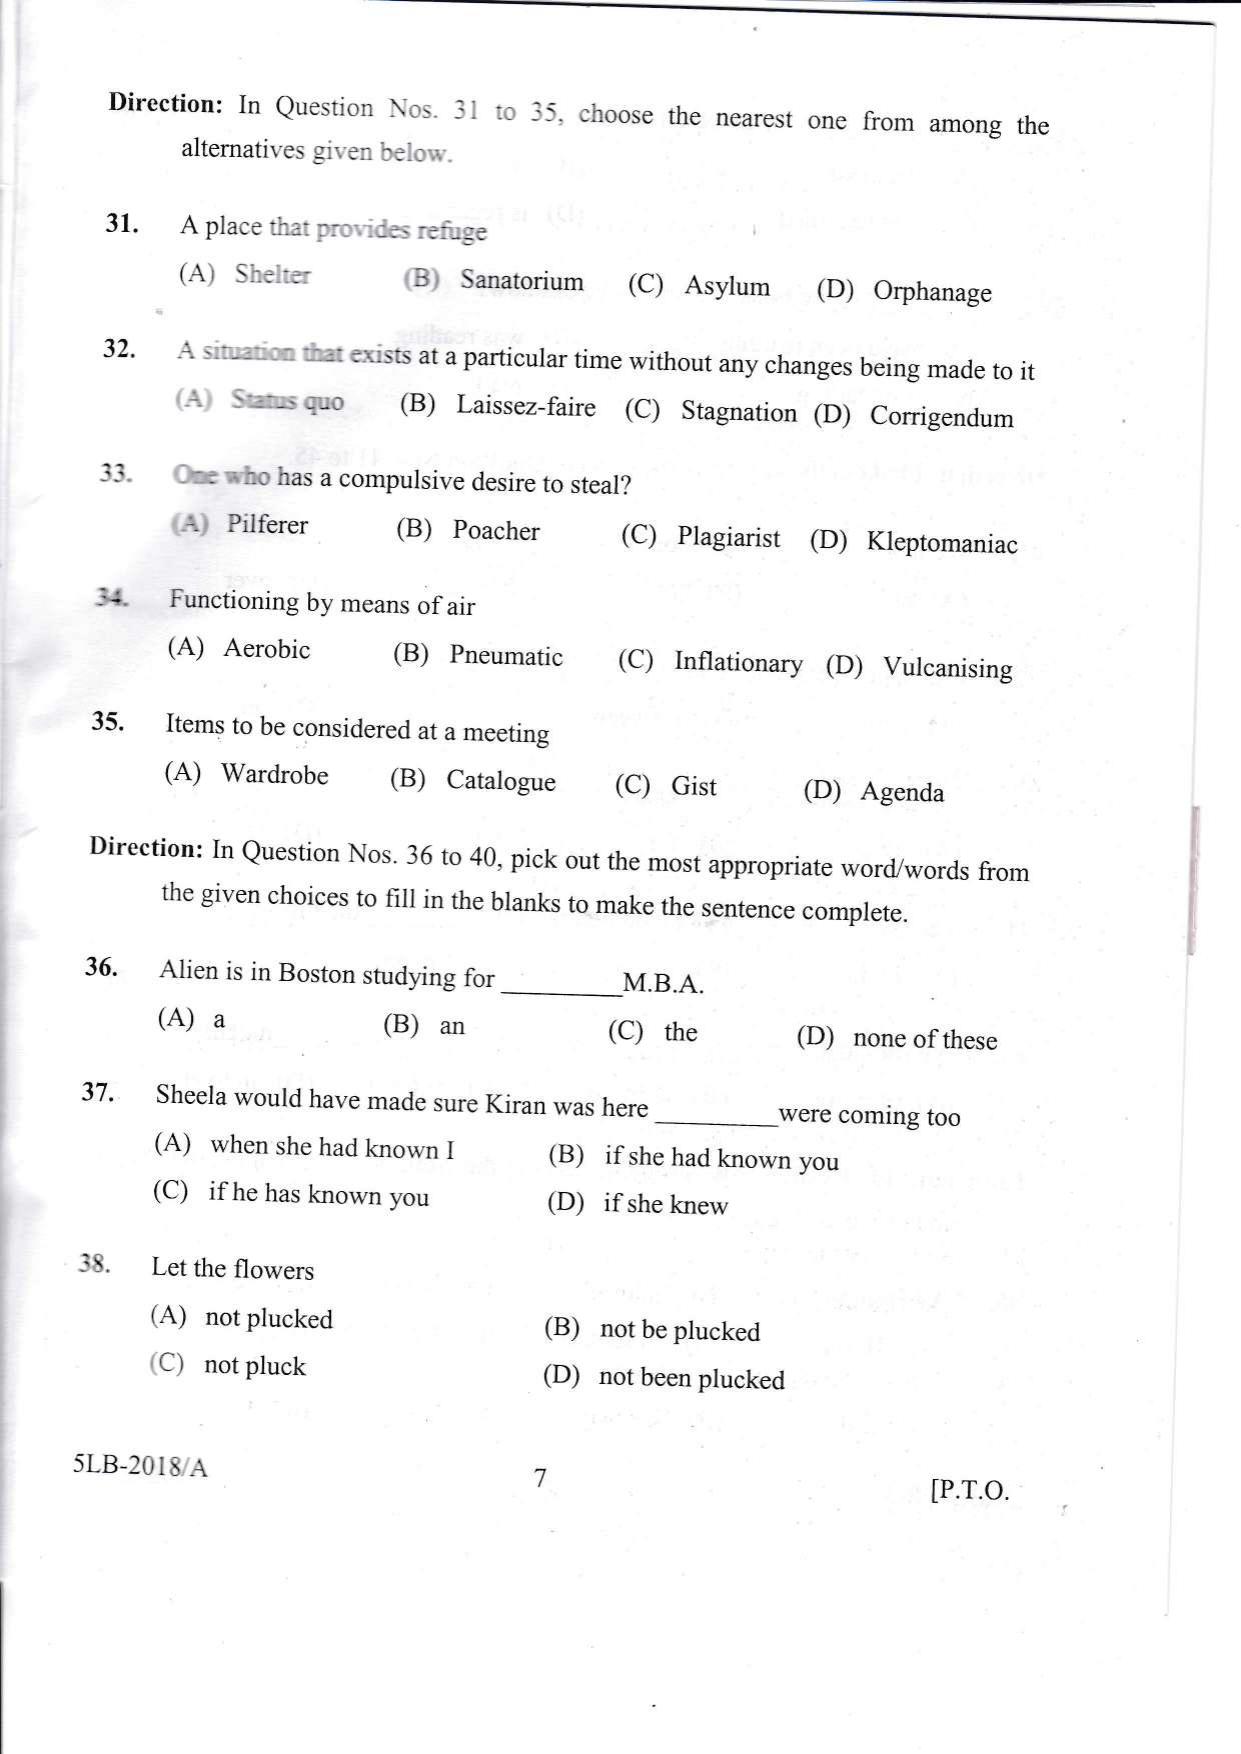 KLEE 5 Year LLB Exam 2018 Question Paper - Page 7